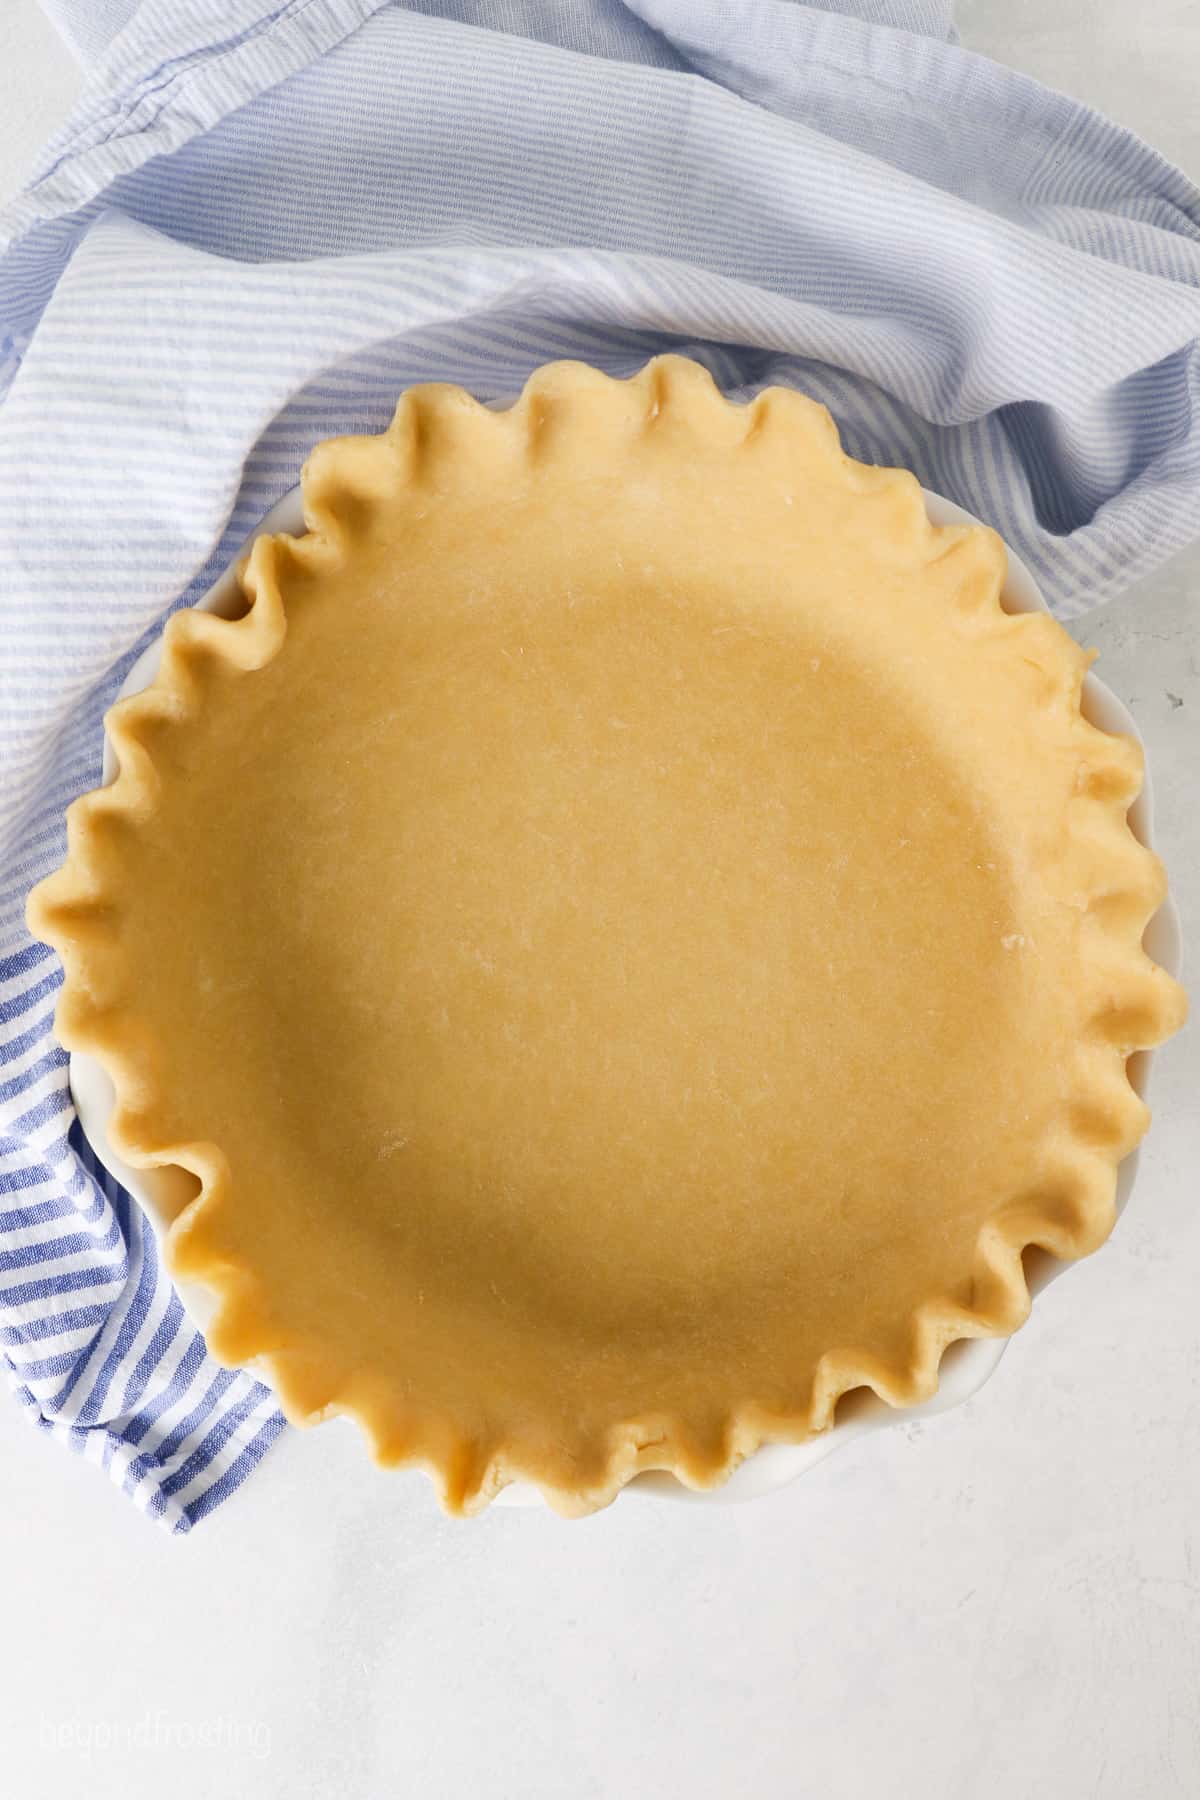 Overhead view of an unbaked pie crust in a pie plate.